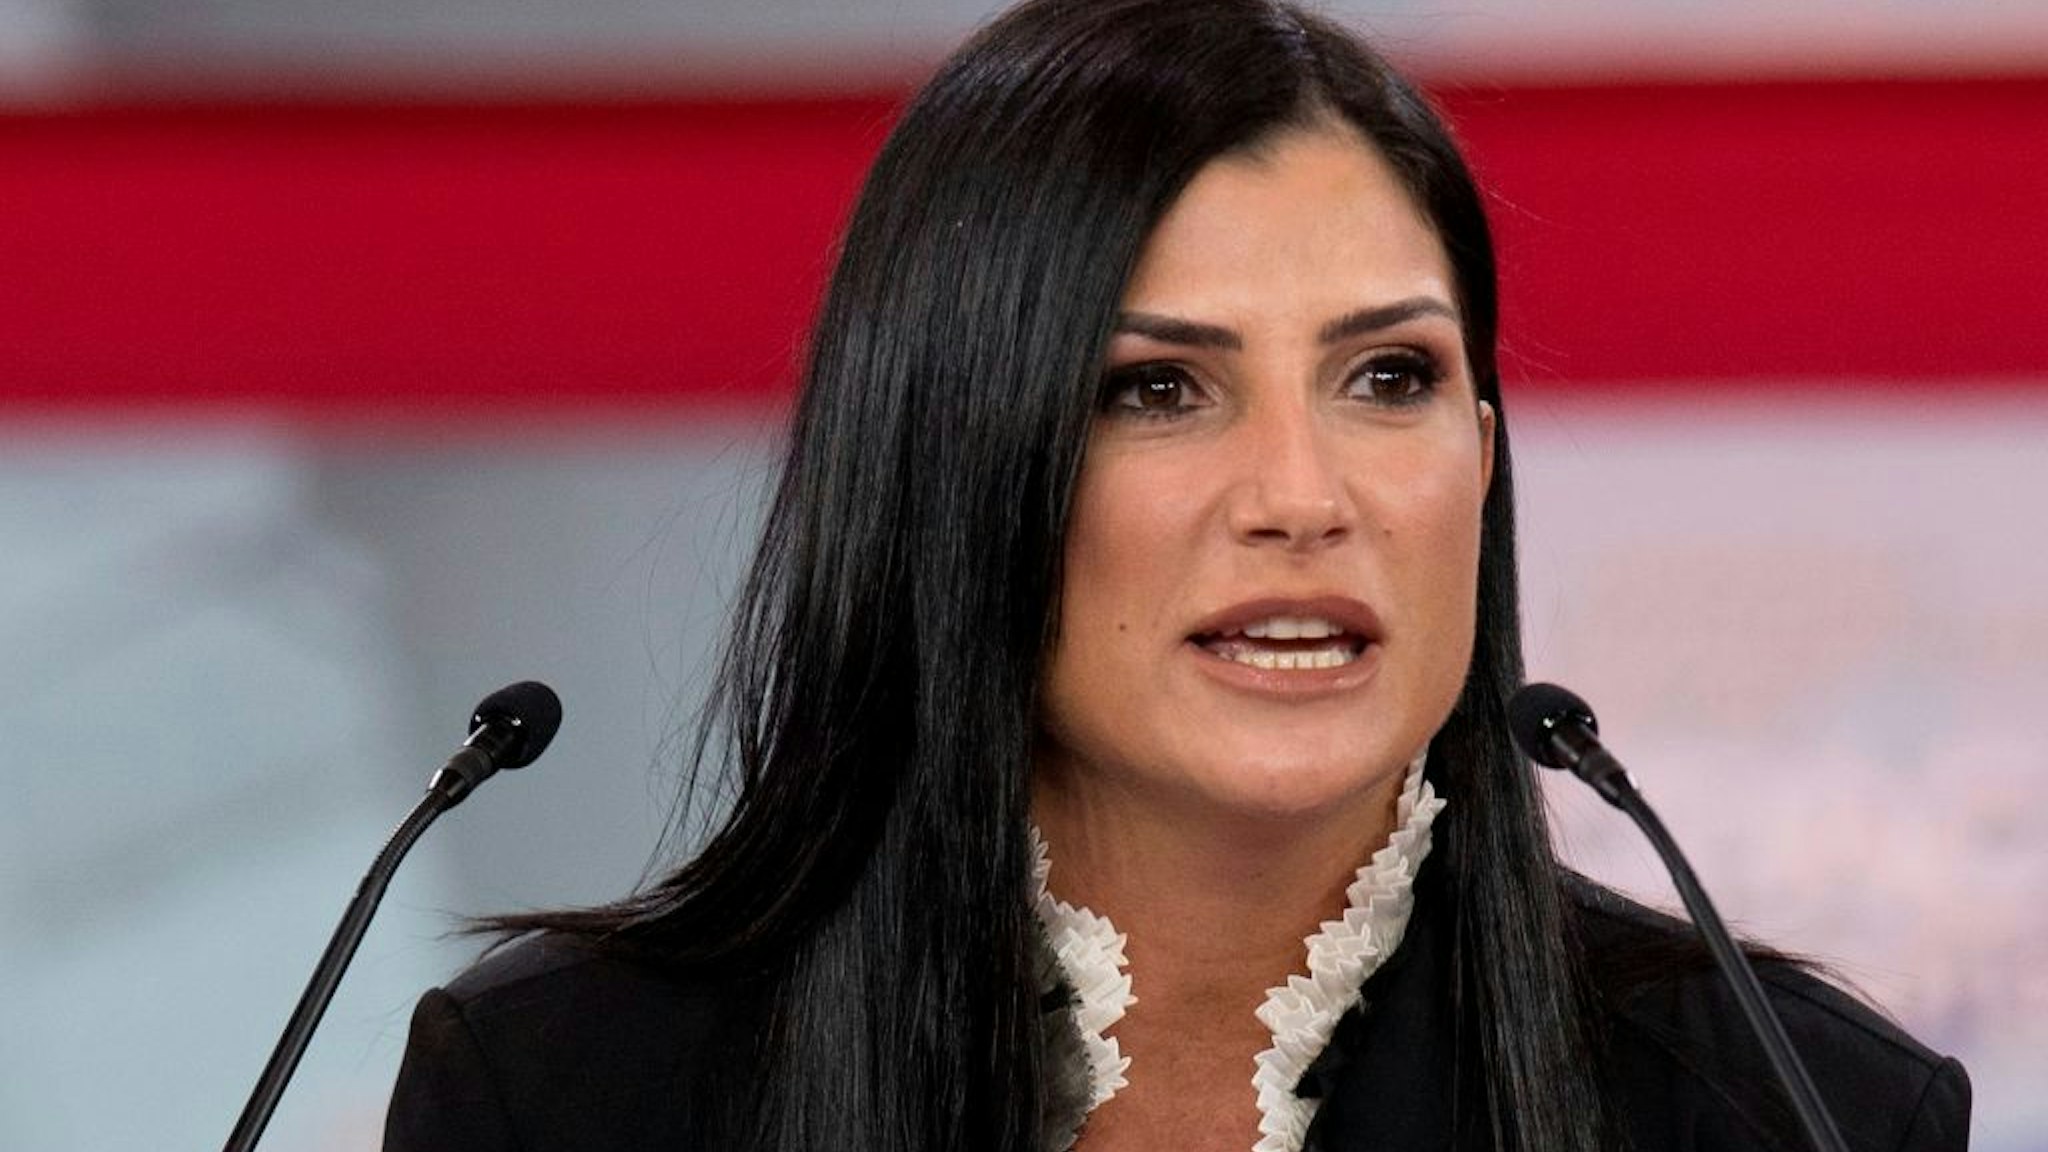 Spokesperson for the National Rifle Association (NRA) Dana Loesch speaks during the 2018 Conservative Political Action Conference at National Harbor in Oxon Hill, Maryland on February 22, 2018.